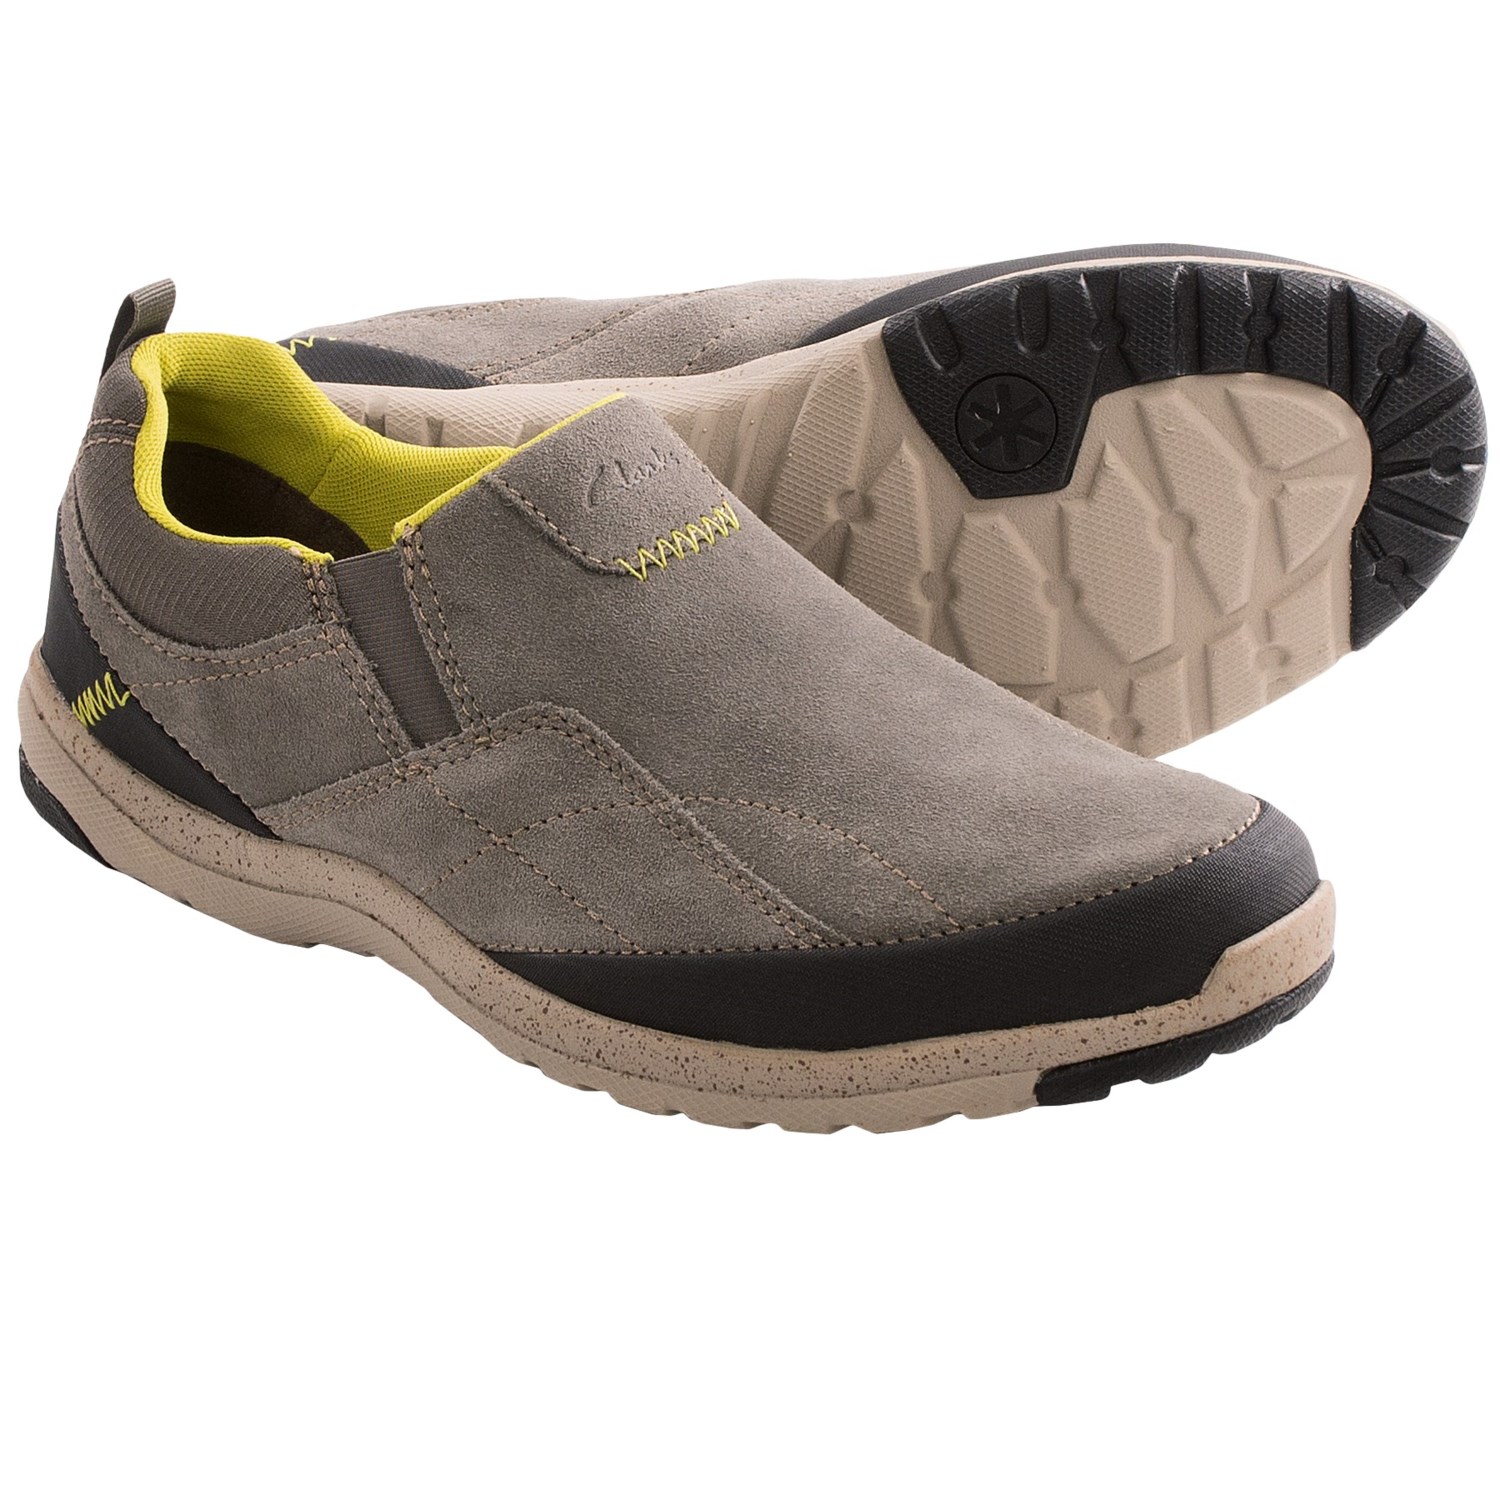 Clarks Sidehill Free Shoes - Suede, Slip-Ons (For Men) - Save 36%